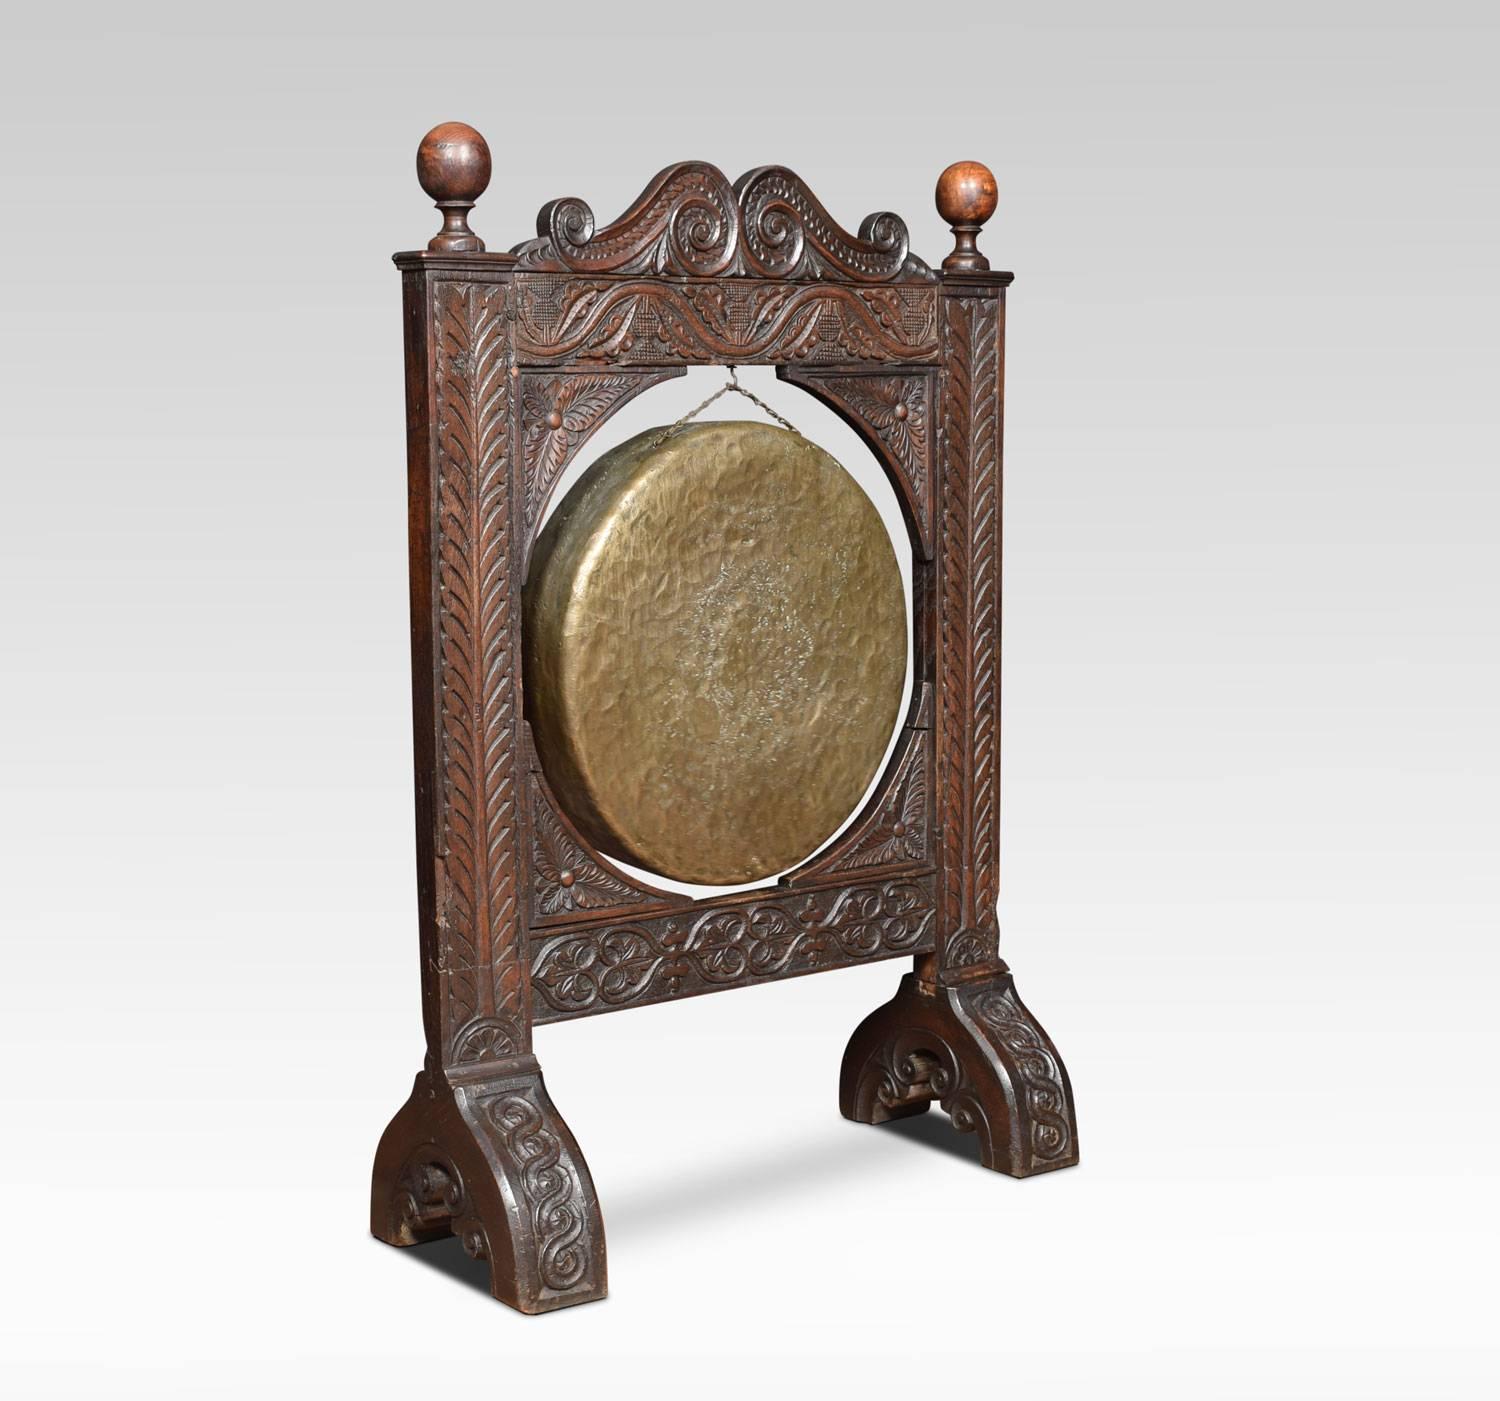 Oak framed Gothic dinner gong and beater. The heavily carved frame containing original brass gong, raised up on four outs-swept legs.
Dimensions:
Height 43 inches
Width 29.5 inches
Depth 12 inches.